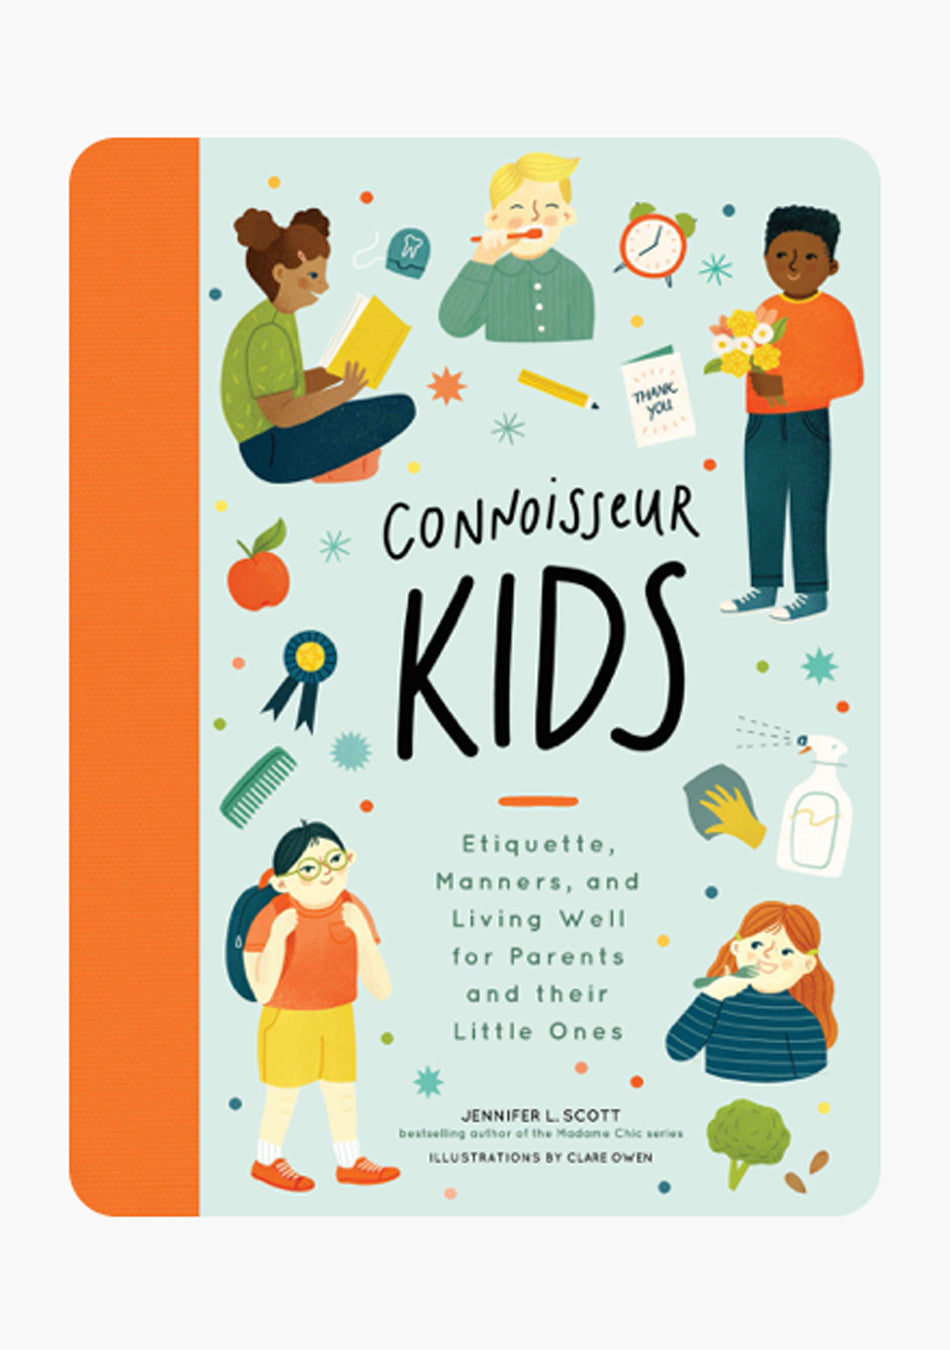 Connoisseur Kids: Etiquette, Manners, and Living Well for Parents and Their Little Ones